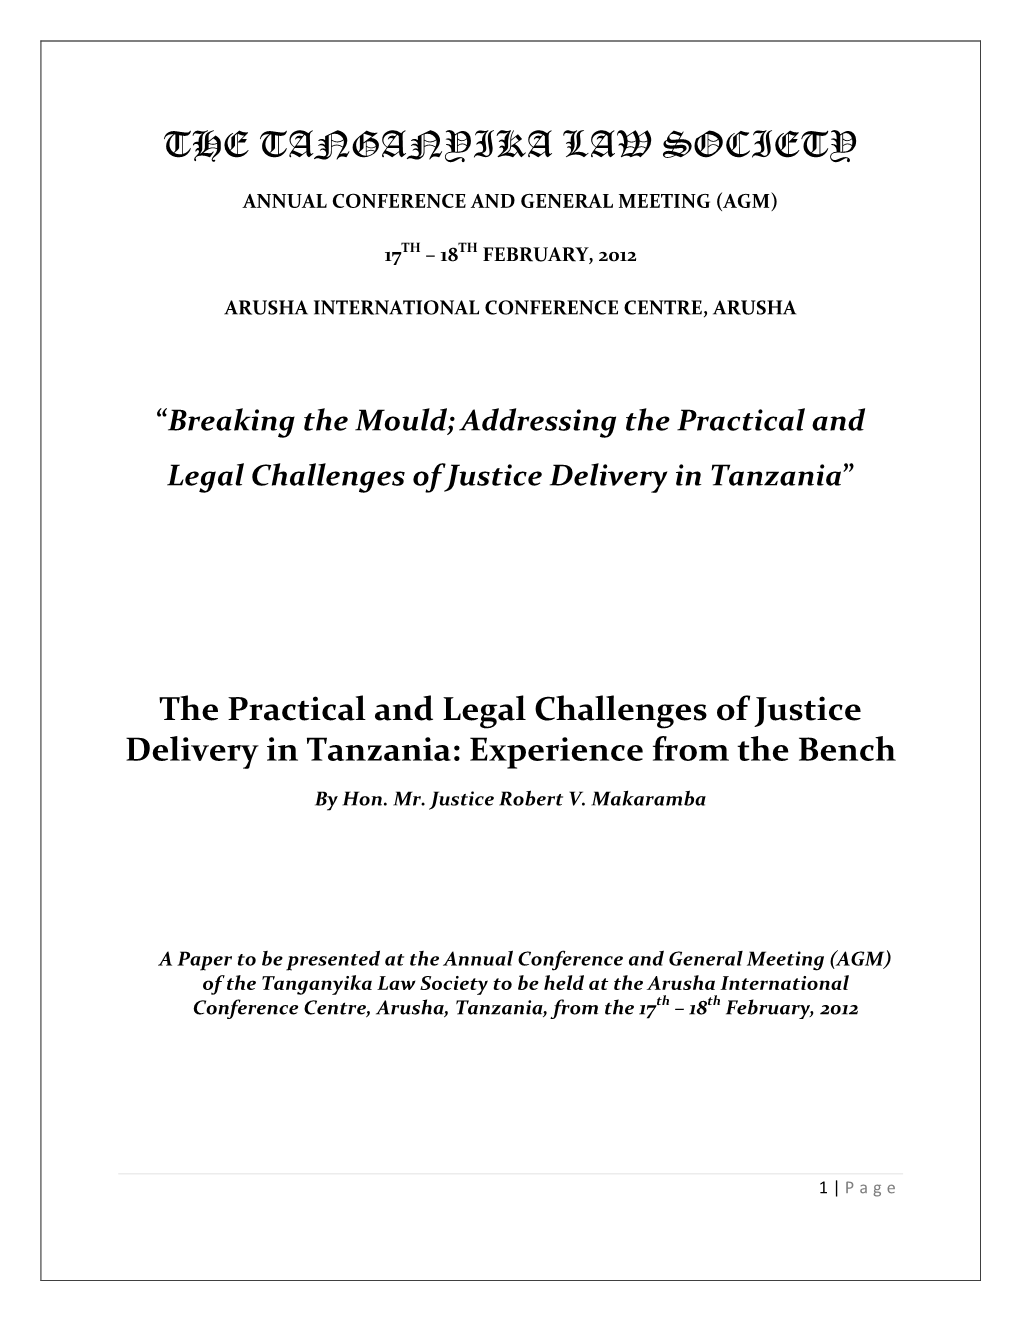 The-Practical-And-Legal-Challenges-Of-Justice-Delivery-In-Tanzania-Experience-From-The